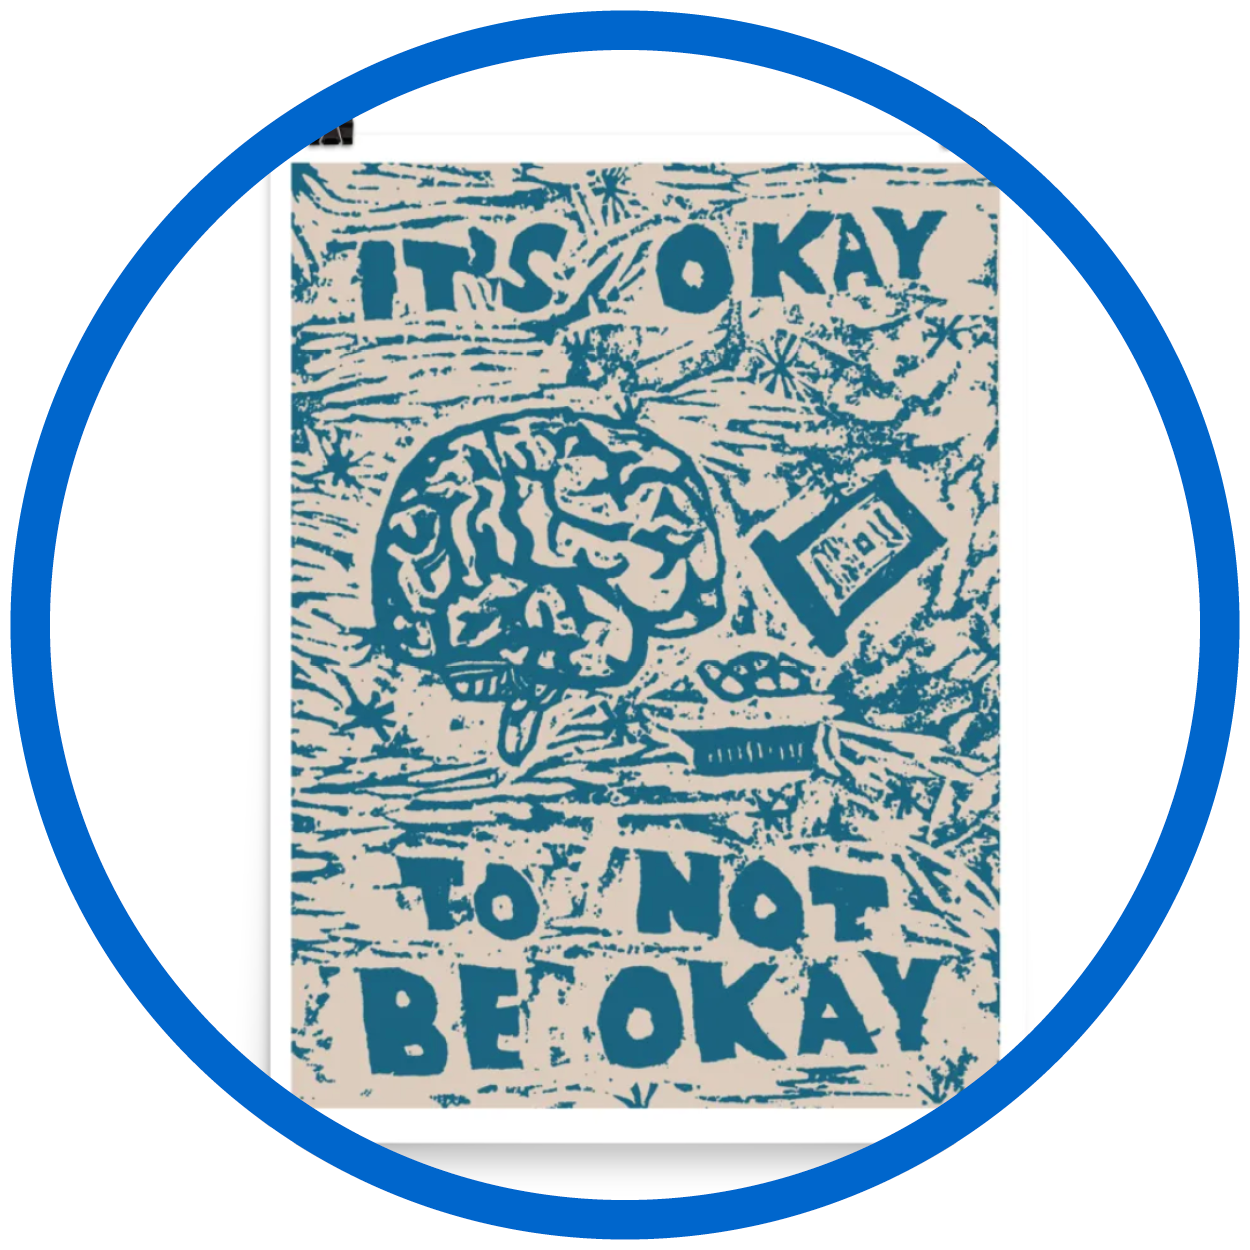 Blue and tan woodcut print with phrase "It's Okay To Not Be Okay" and brain design.